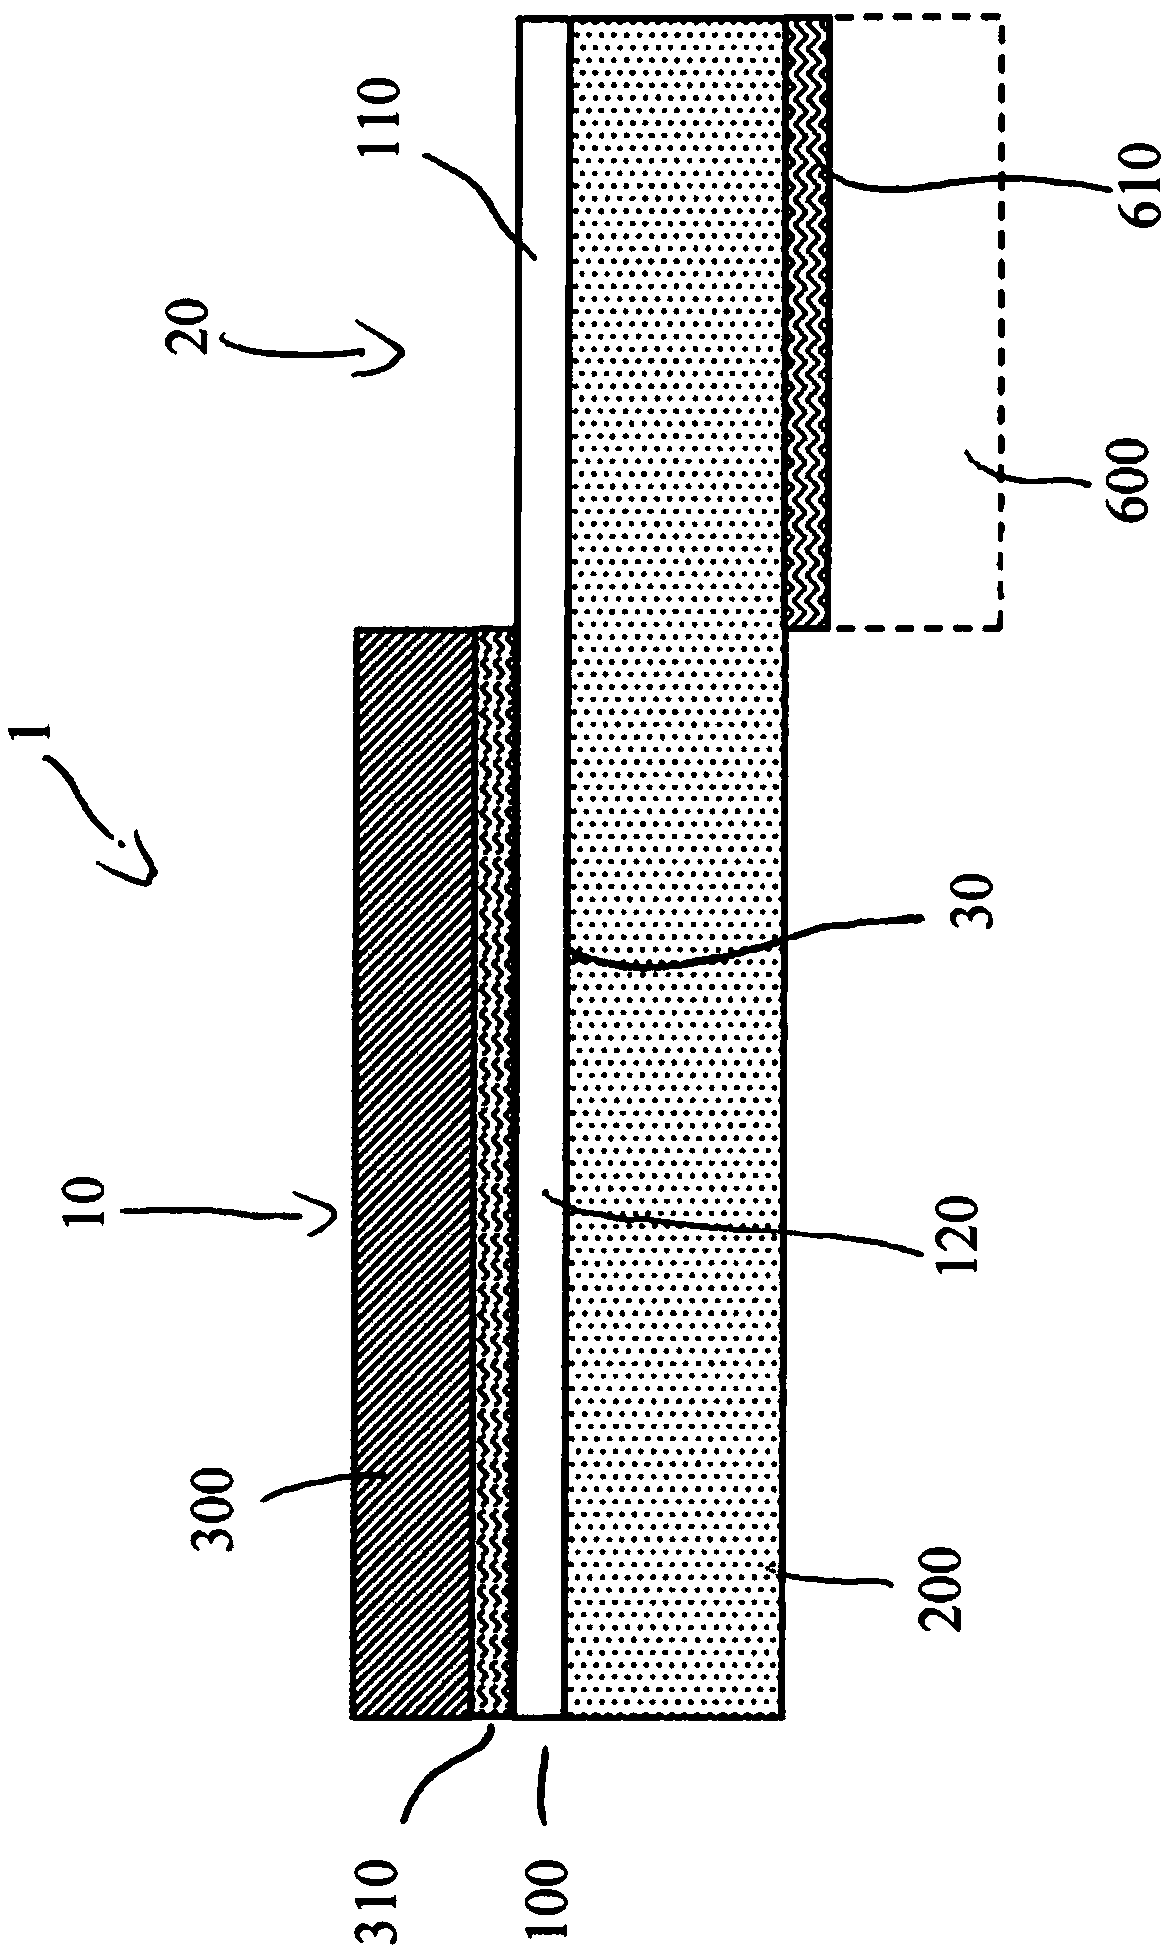 Film structure with electrical functionality and external contacting